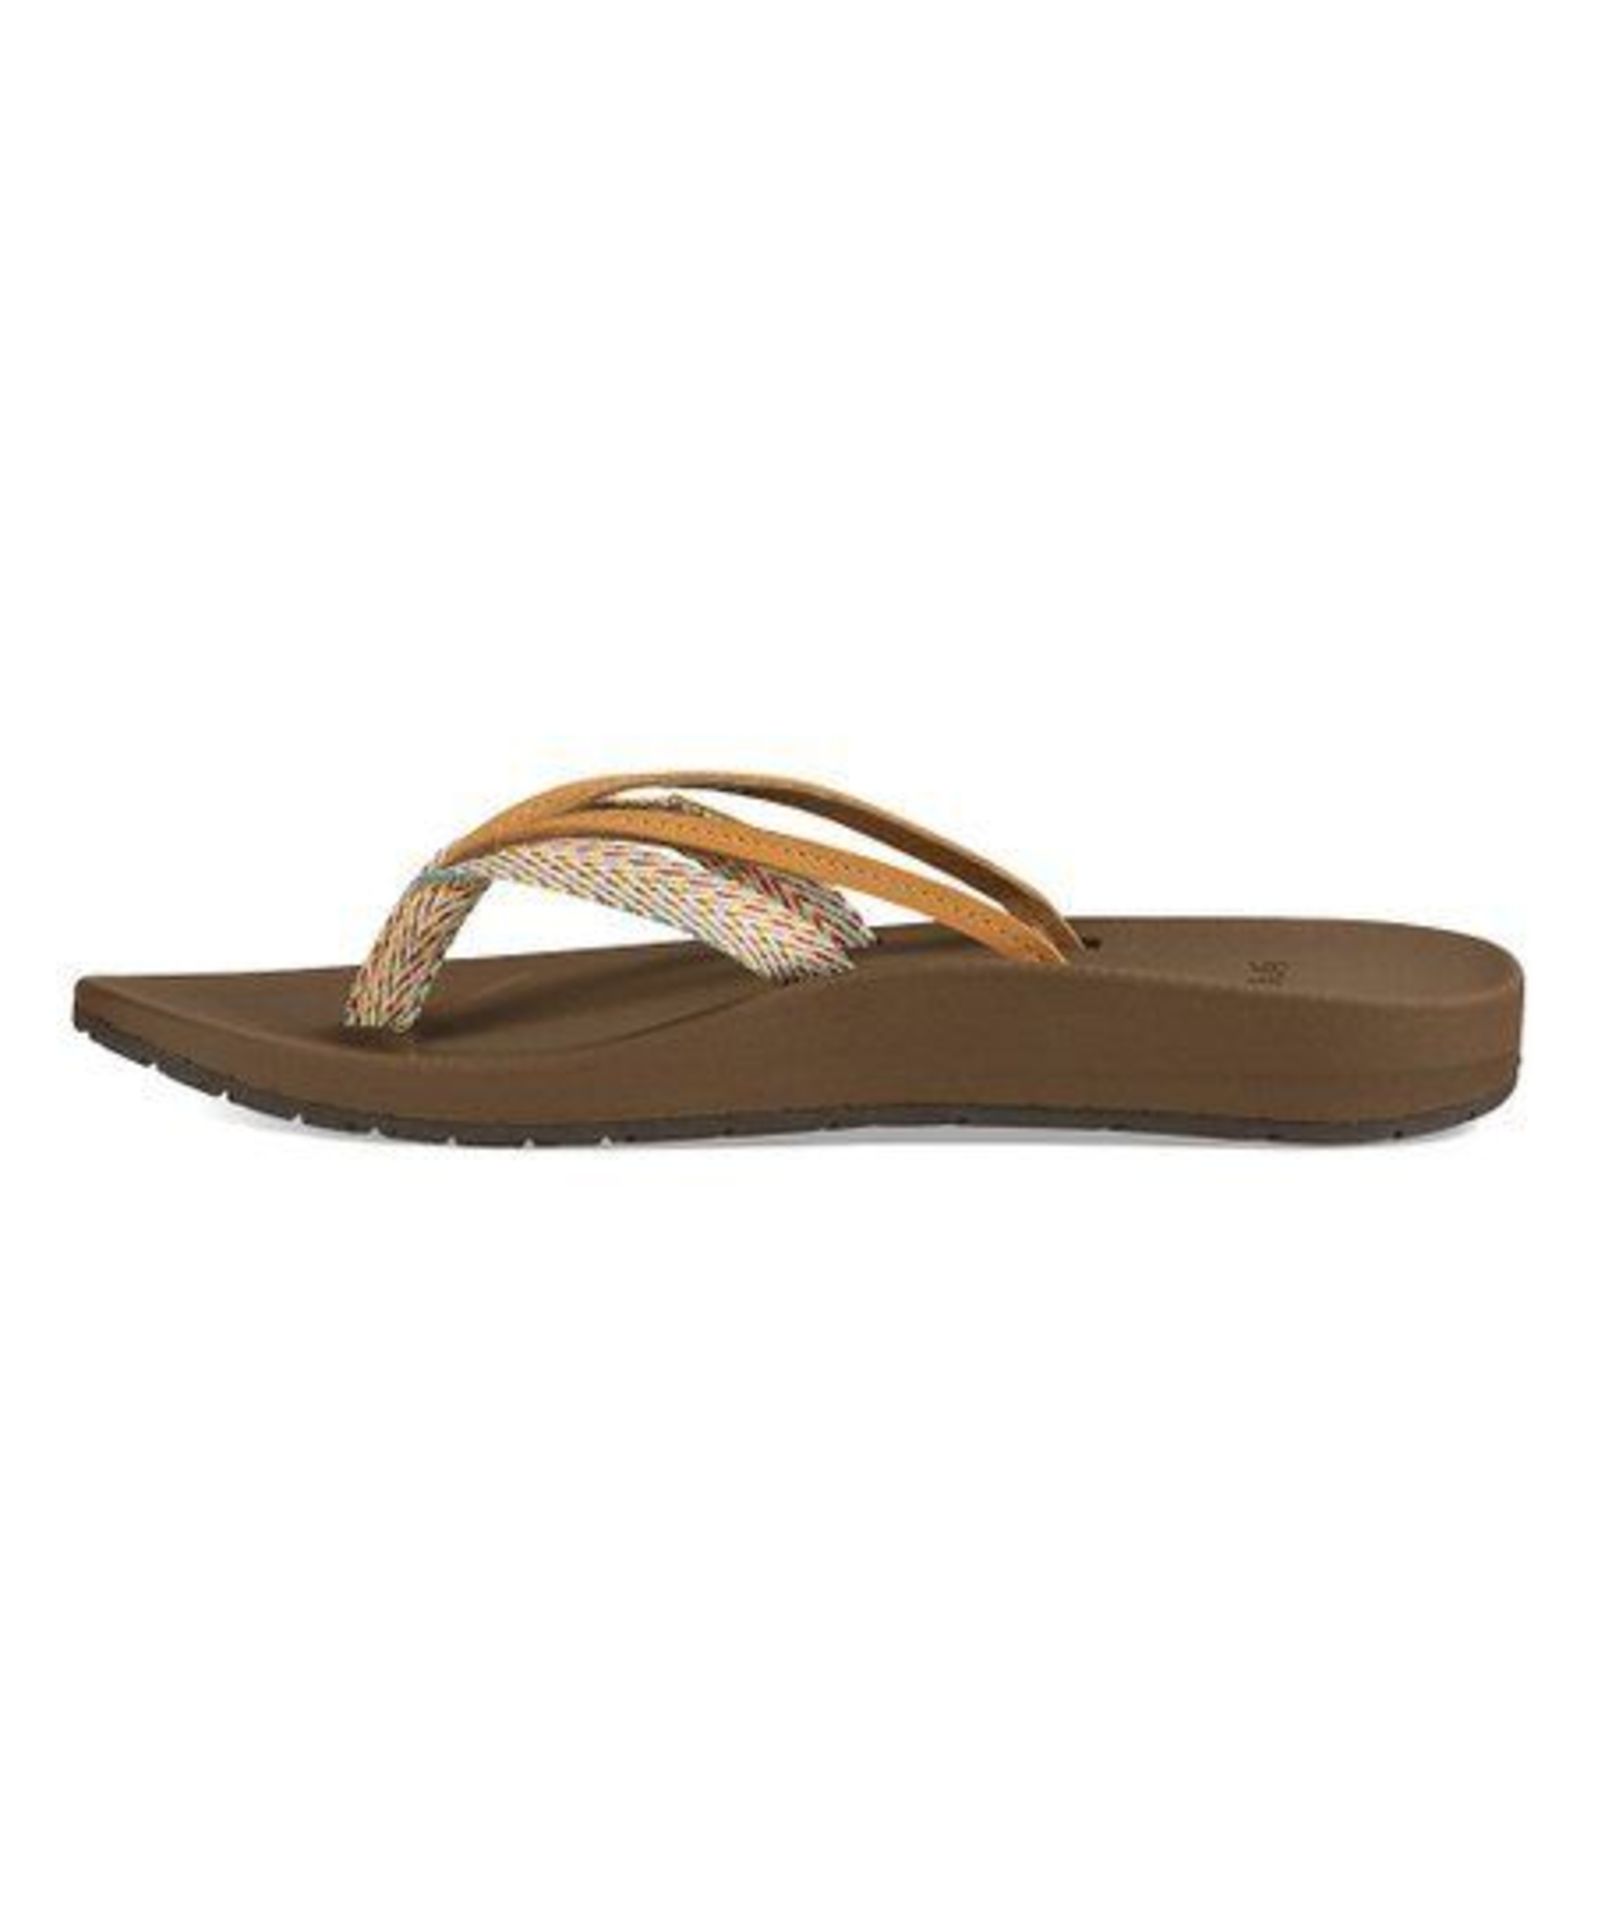 Teva Tan Azure 2-Strap Flip-Flop Uk Size:4 (New With Box) [Ref: 54275435-B-002-Tf] - Image 3 of 5